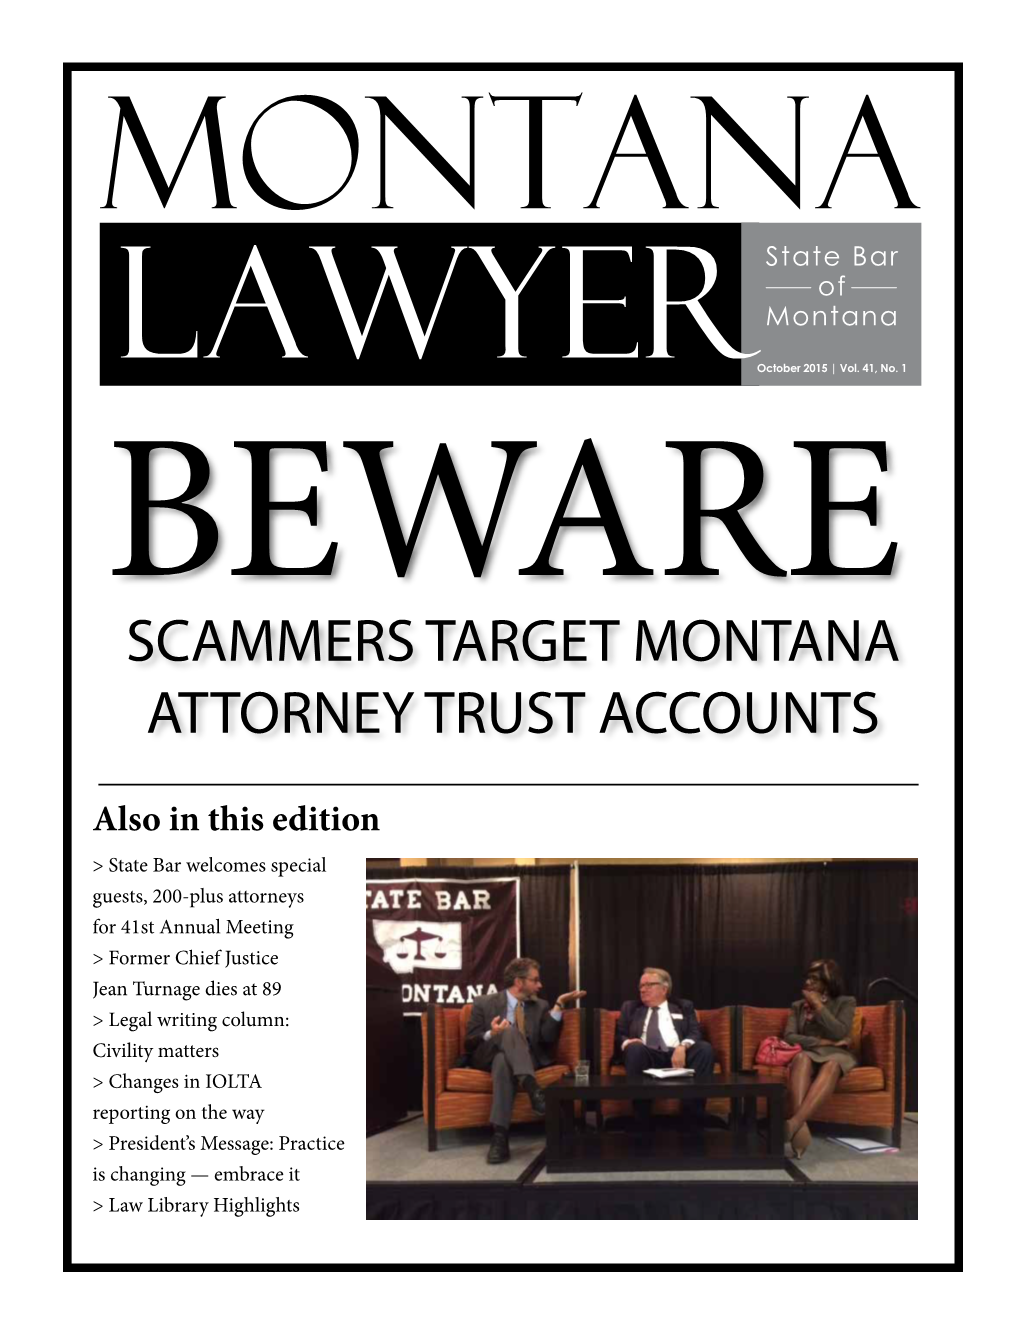 Scammers Target Montana Attorney Trust Accounts